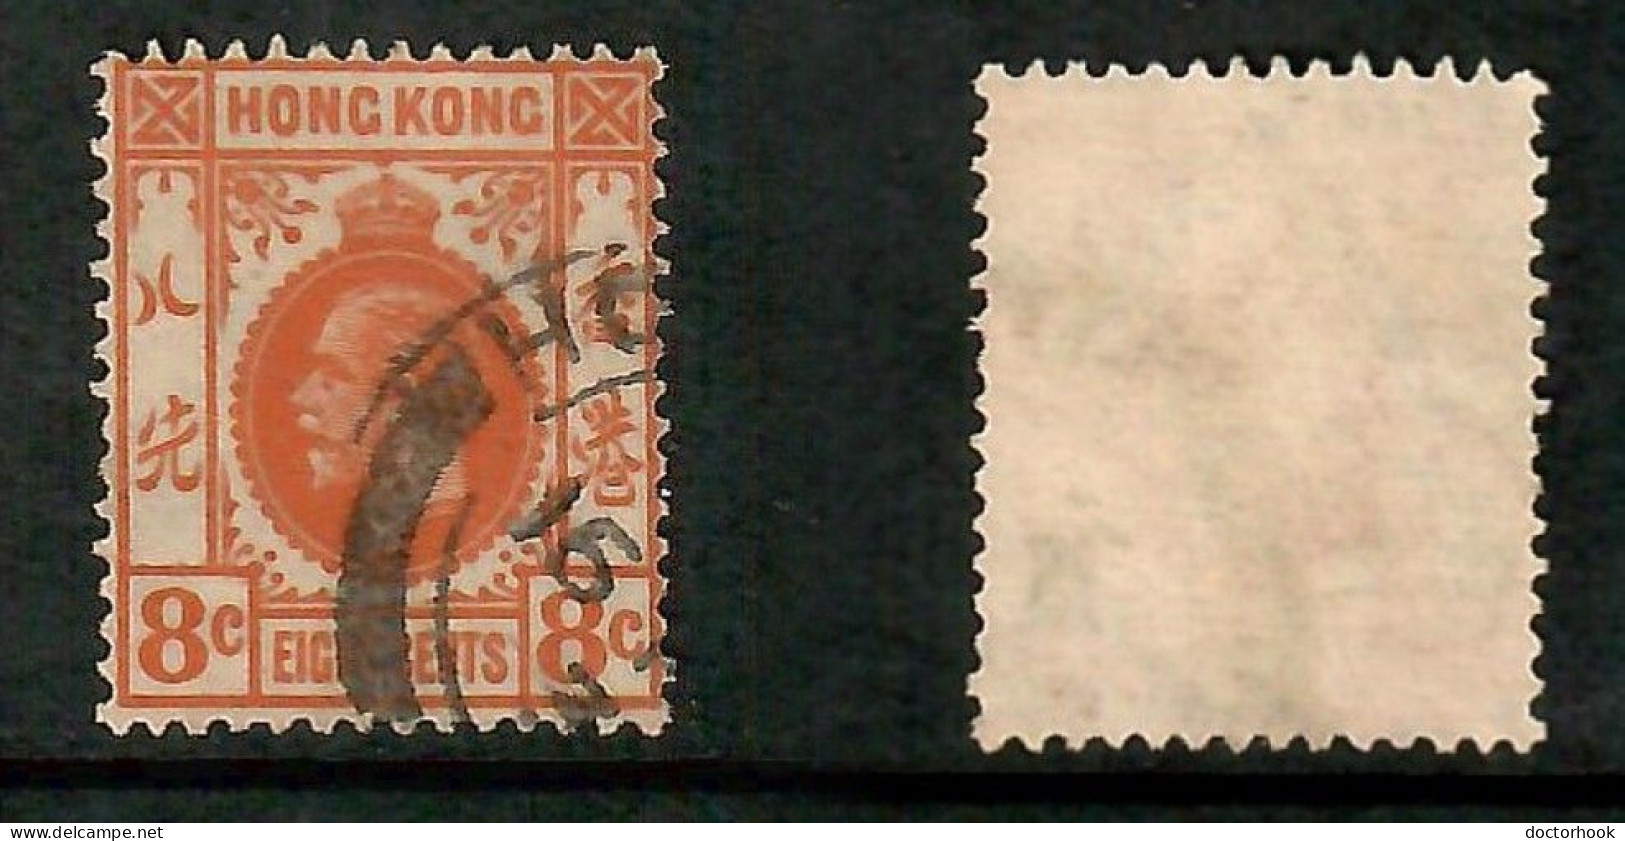 HONG KONG   Scott # 136 USED (CONDITION AS PER SCAN) (Stamp Scan # 991-11) - Used Stamps